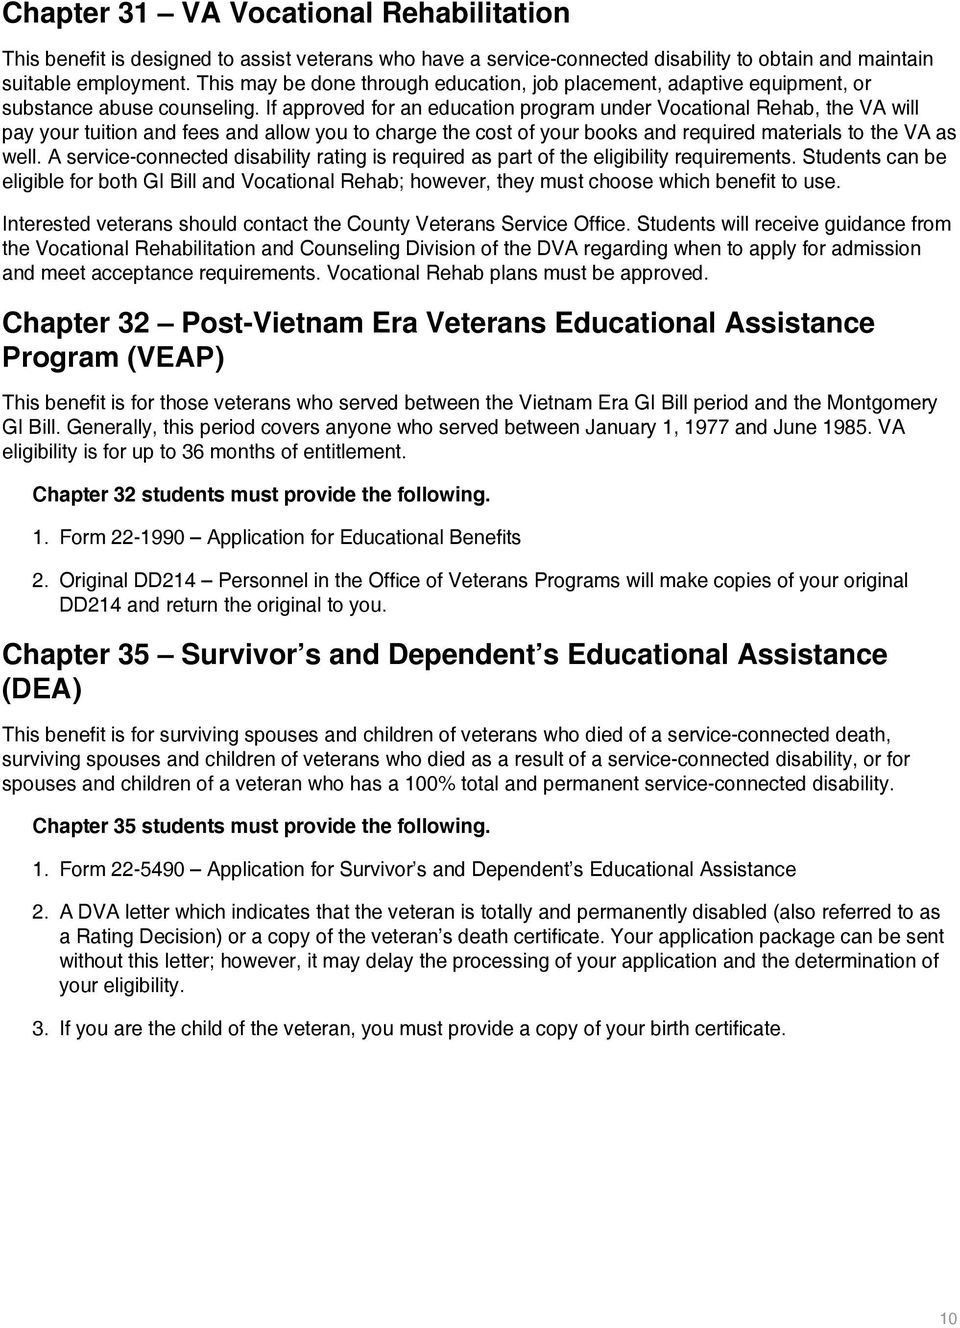 If approved for an education program under Vocational Rehab, the VA will pay your tuition and fees and allow you to charge the cost of your books and required materials to the VA as well.